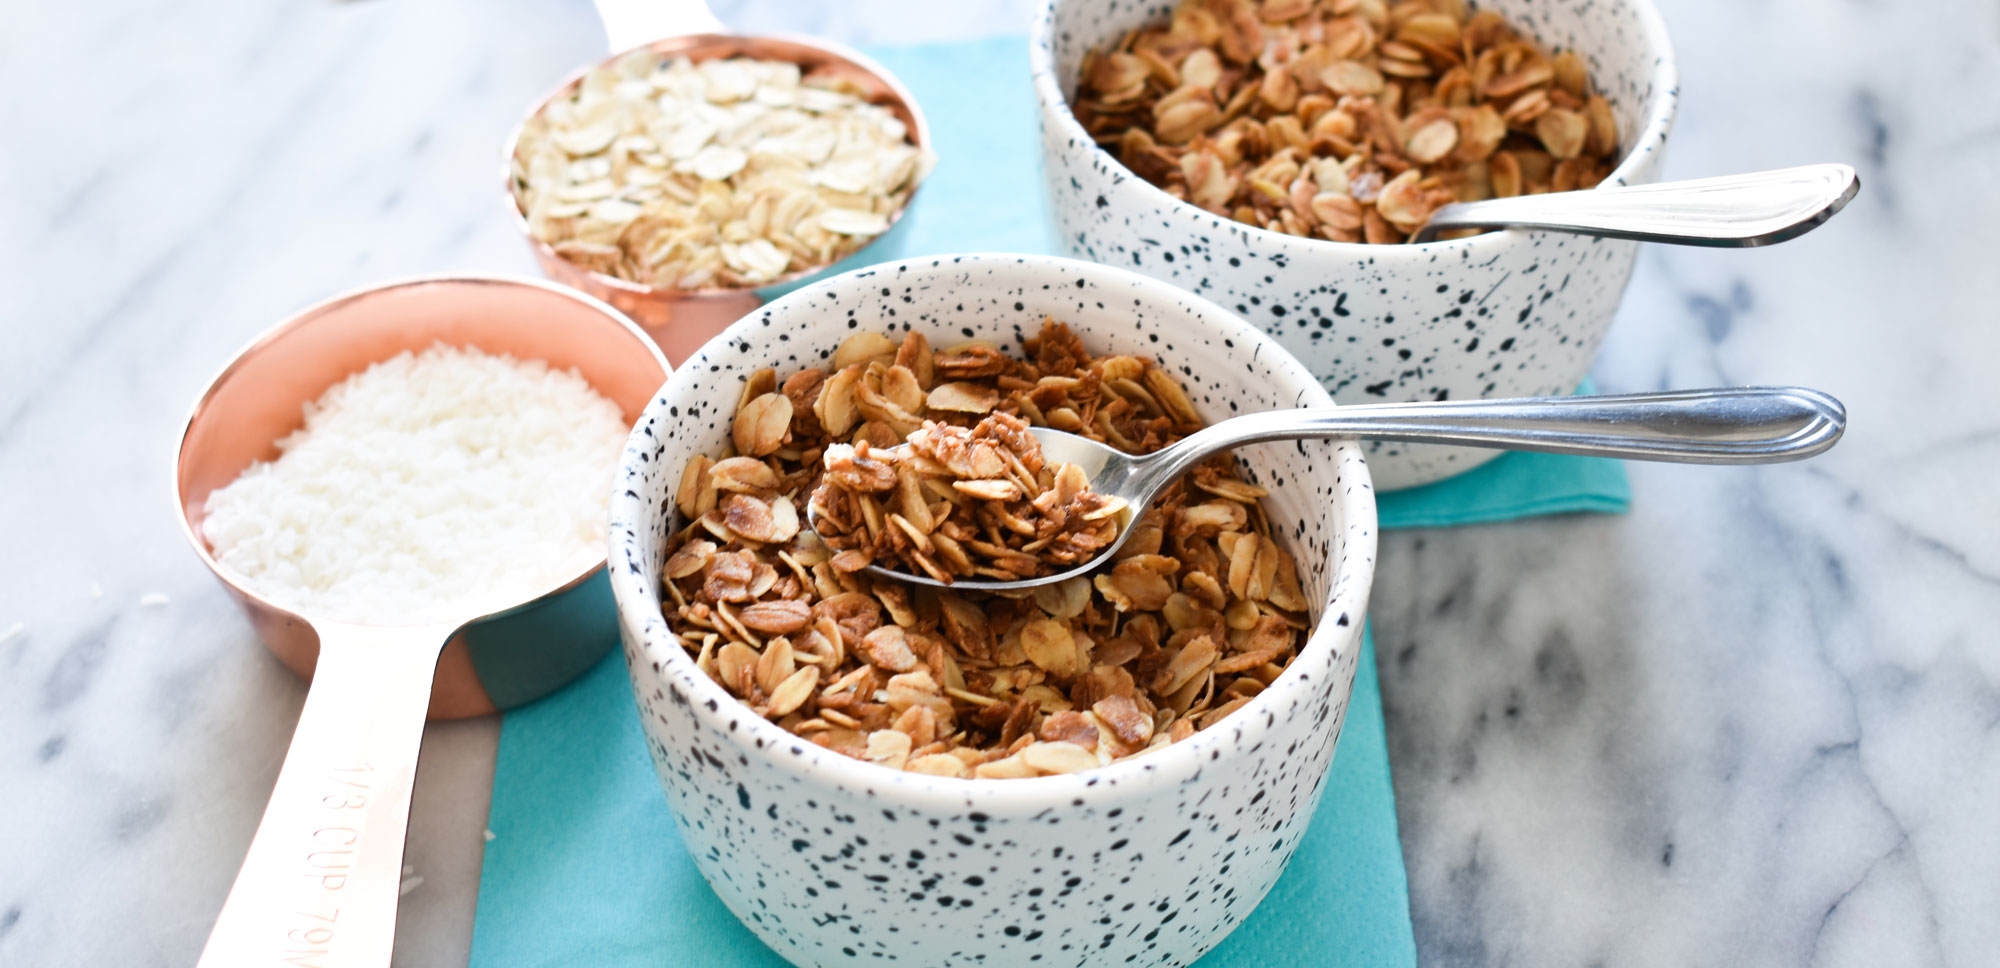 Child's allergy friendly toasted granola recipe by Smile Cafe